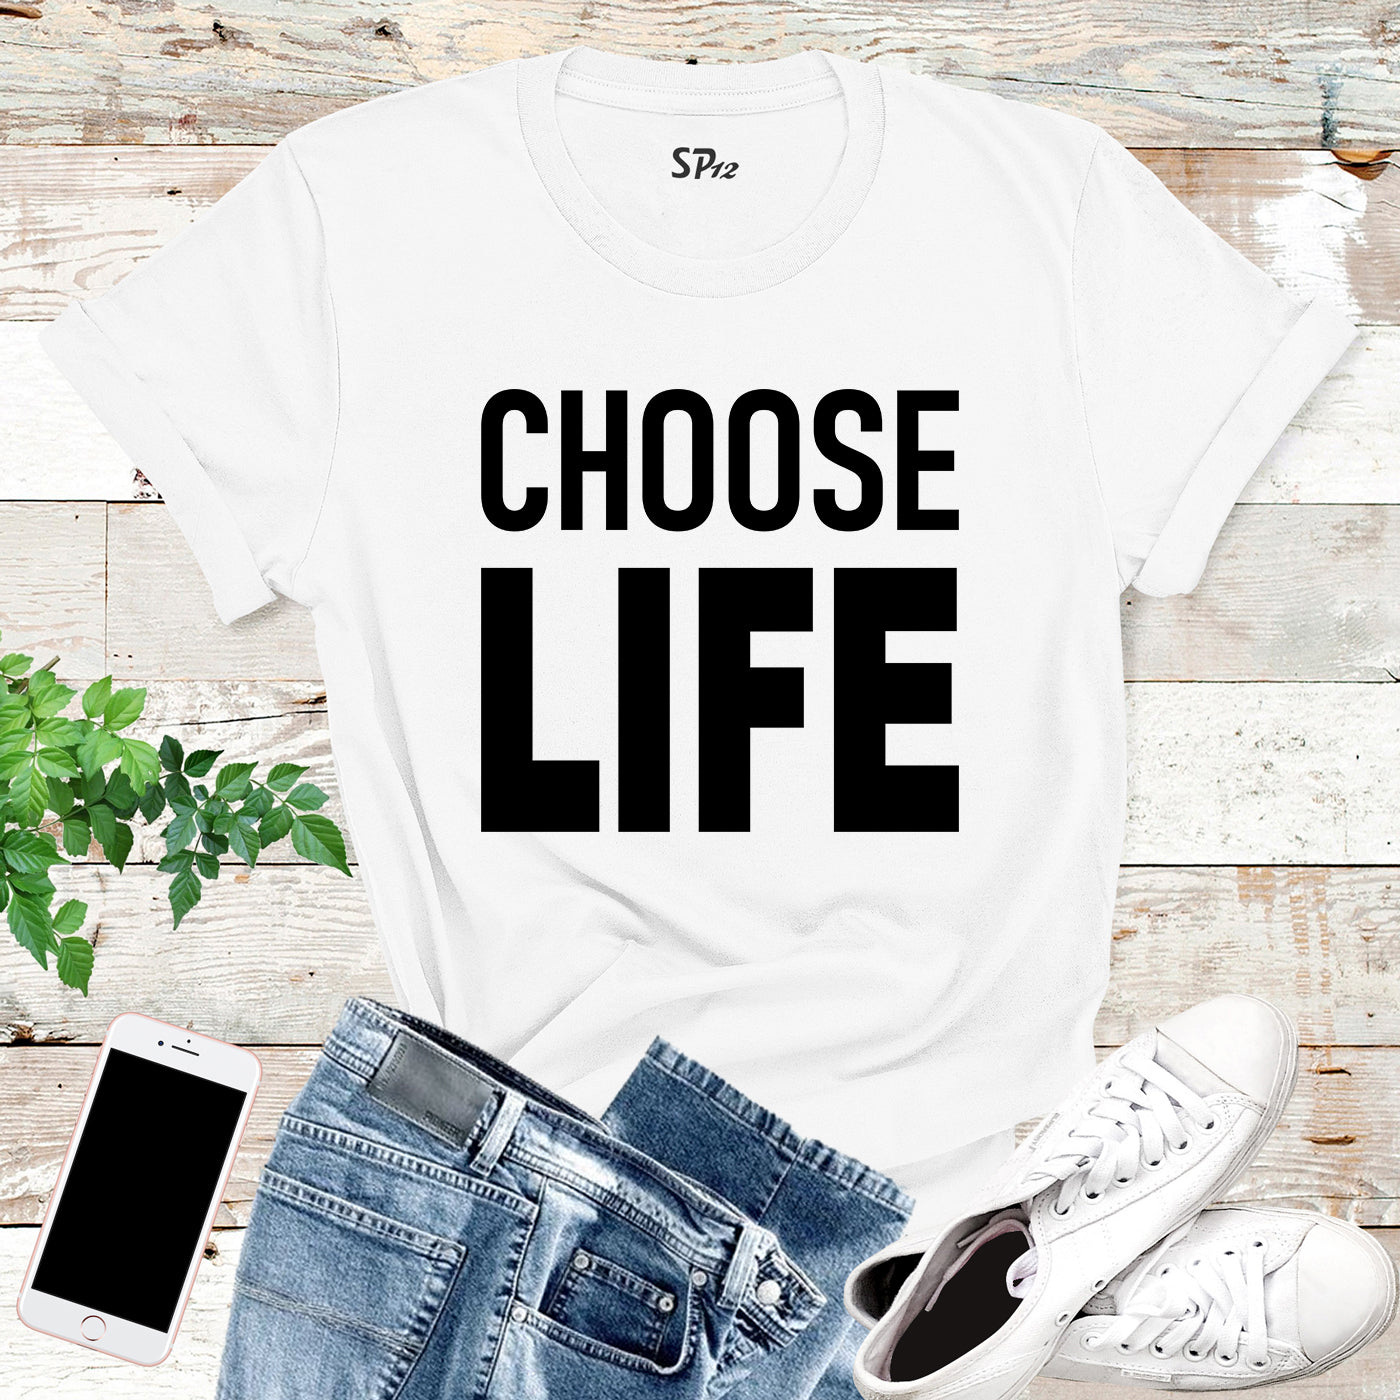 CHOOSE LIFE T-Shirt George Michael WHAM 80s Costume Party Re